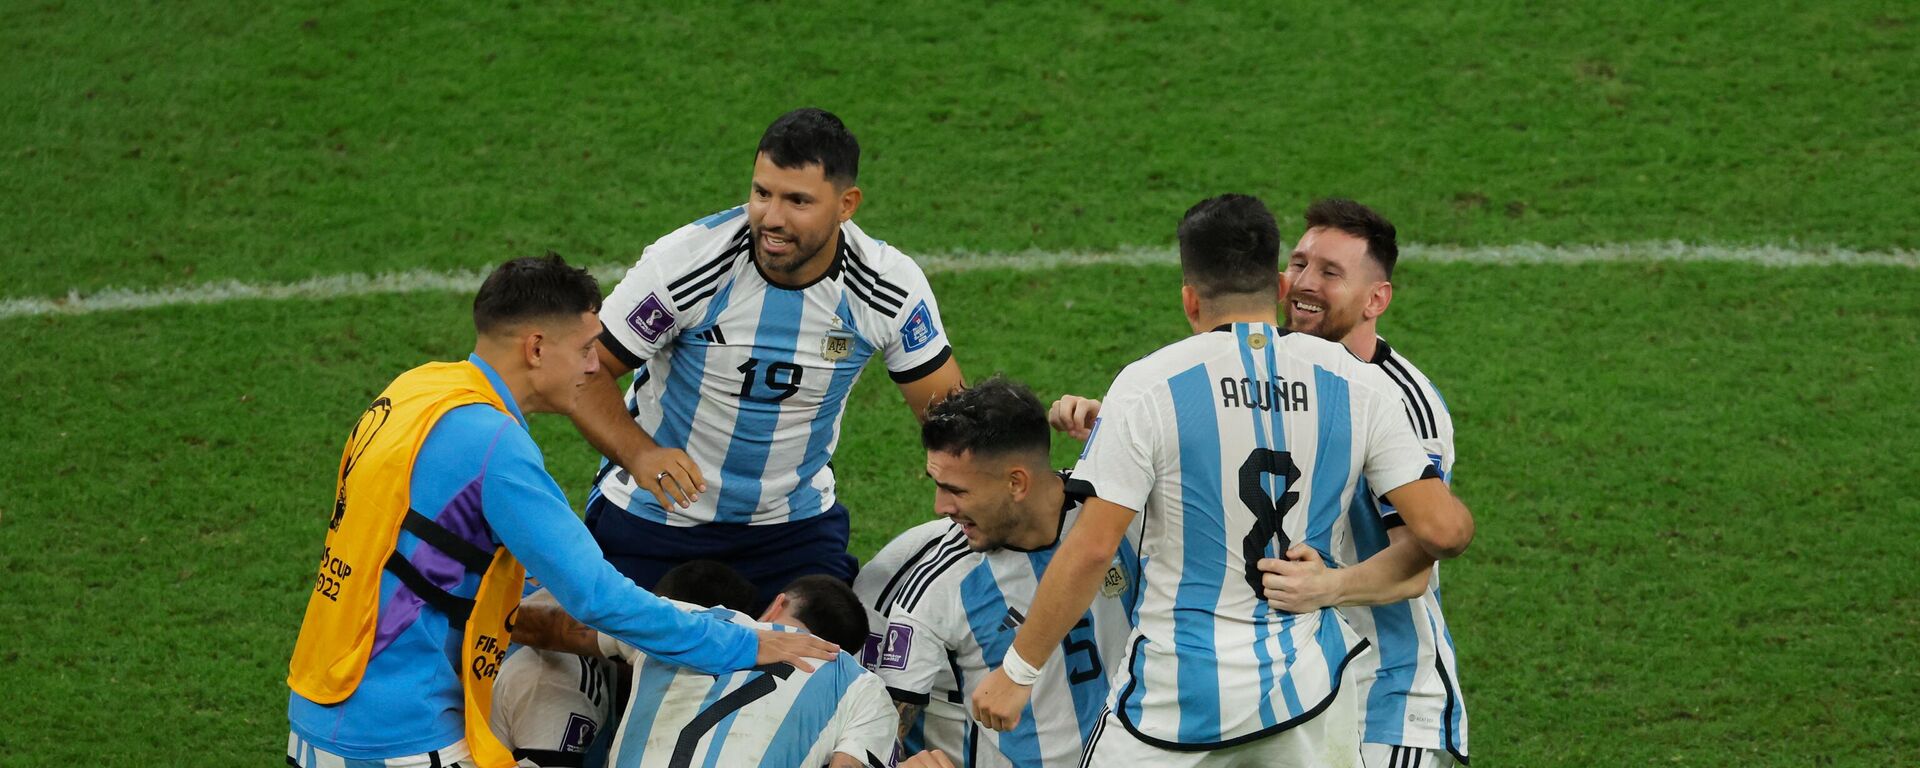 Argentina's players celebrate after winning the Qatar 2022 World Cup football final against France at the Lusail Stadium in Lusail, north of Doha on December 18, 2022. - Sputnik International, 1920, 18.12.2022